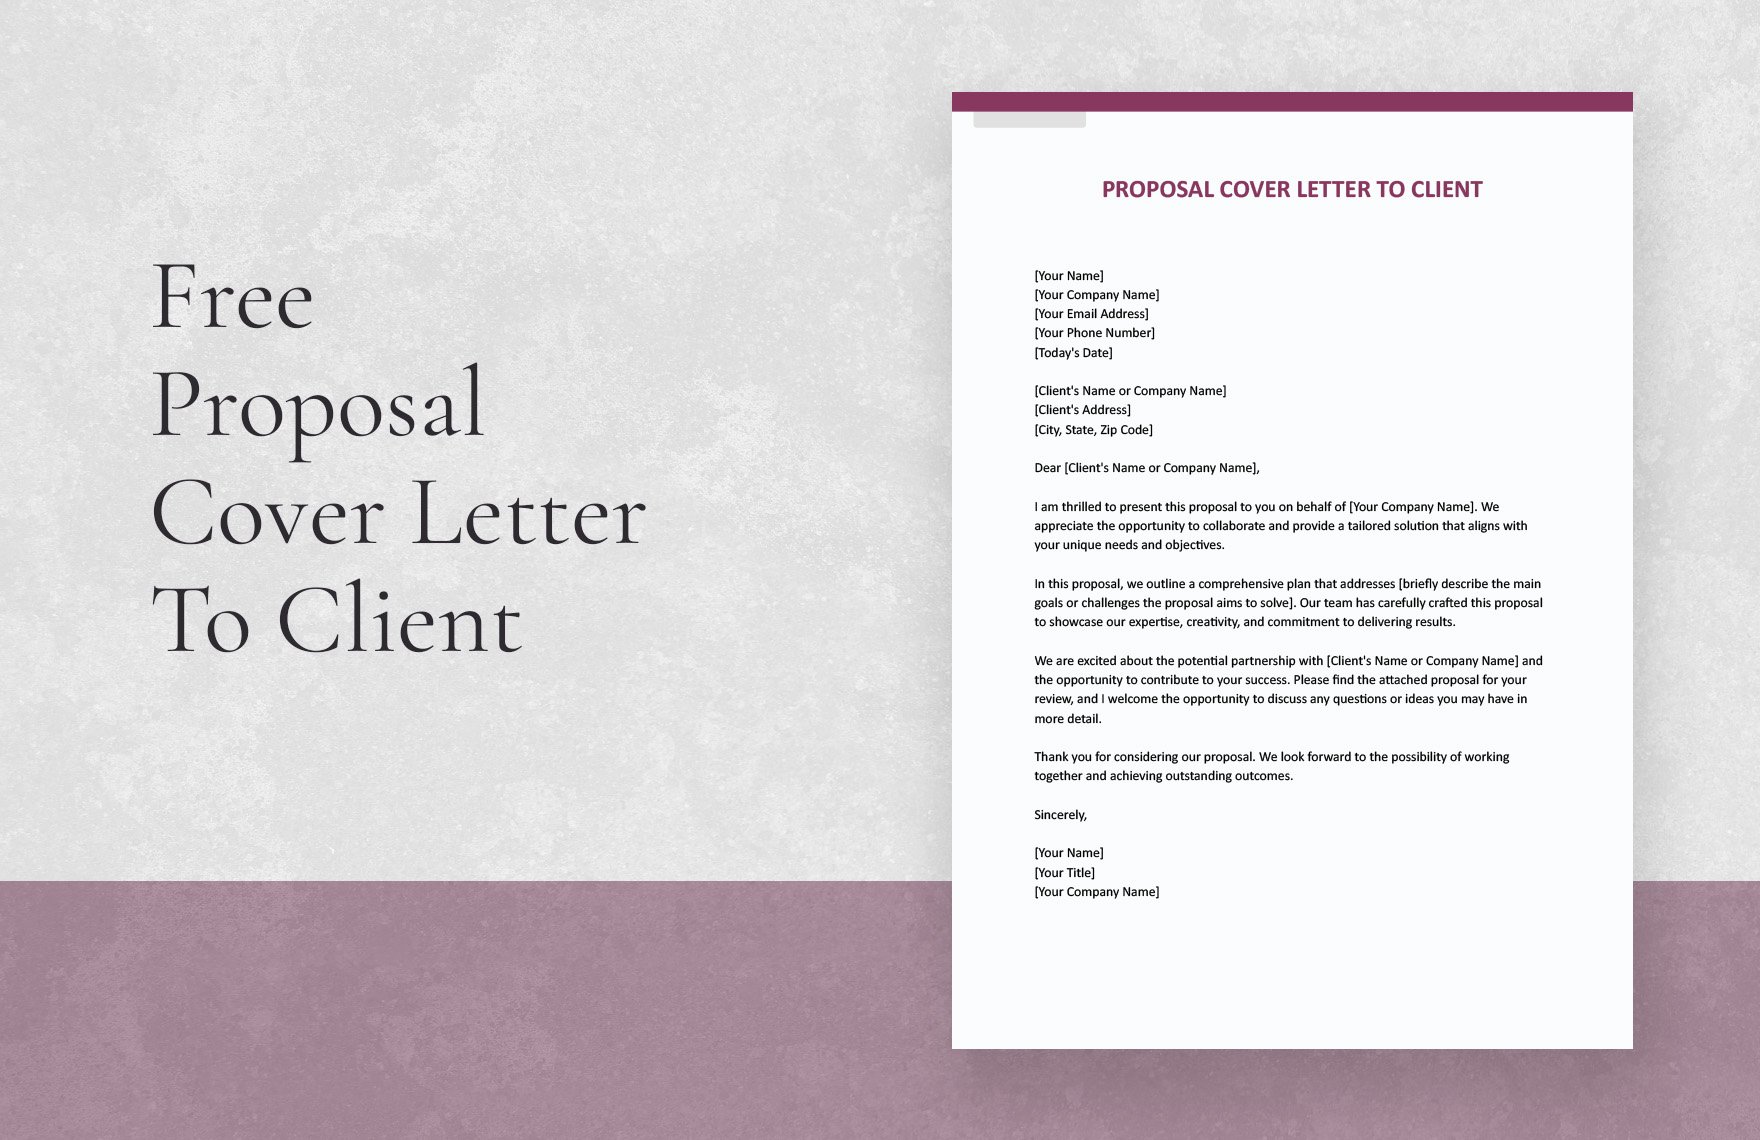 Proposal Cover Letter To Client in Word, Google Docs